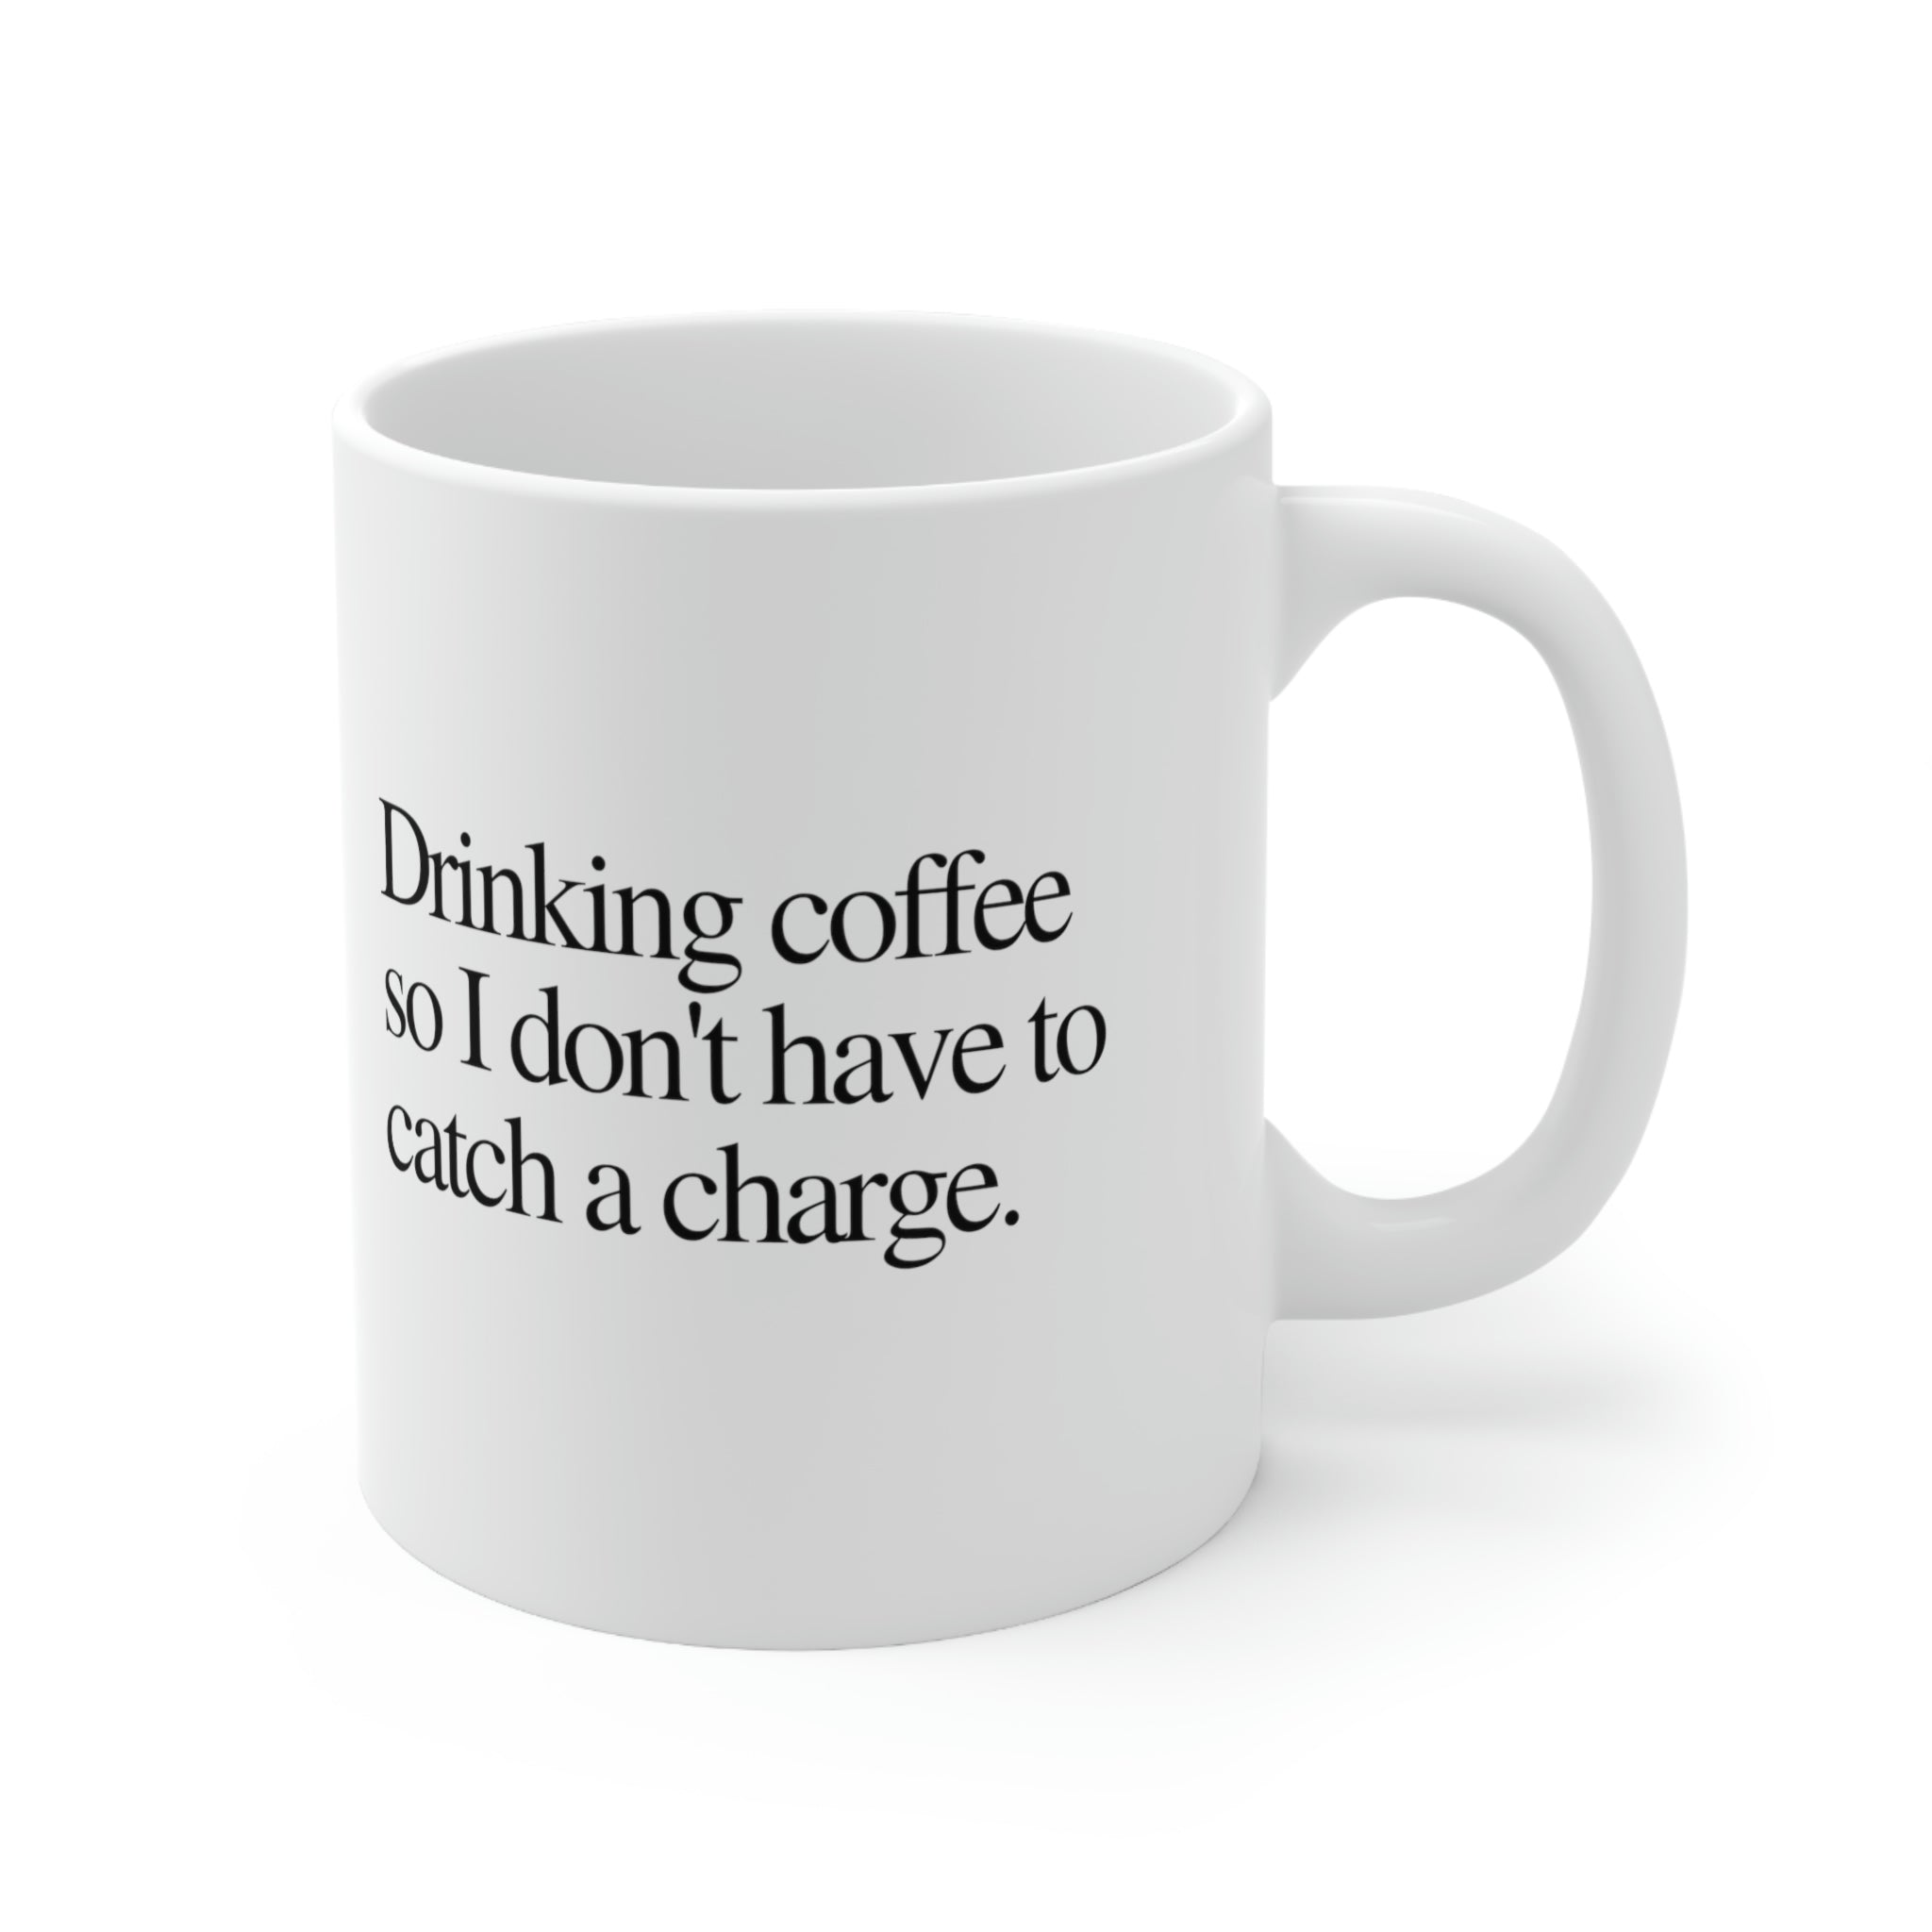 Drinking Coffee So I Don't Have To Catch A Charge Ceramic Mug 11oz